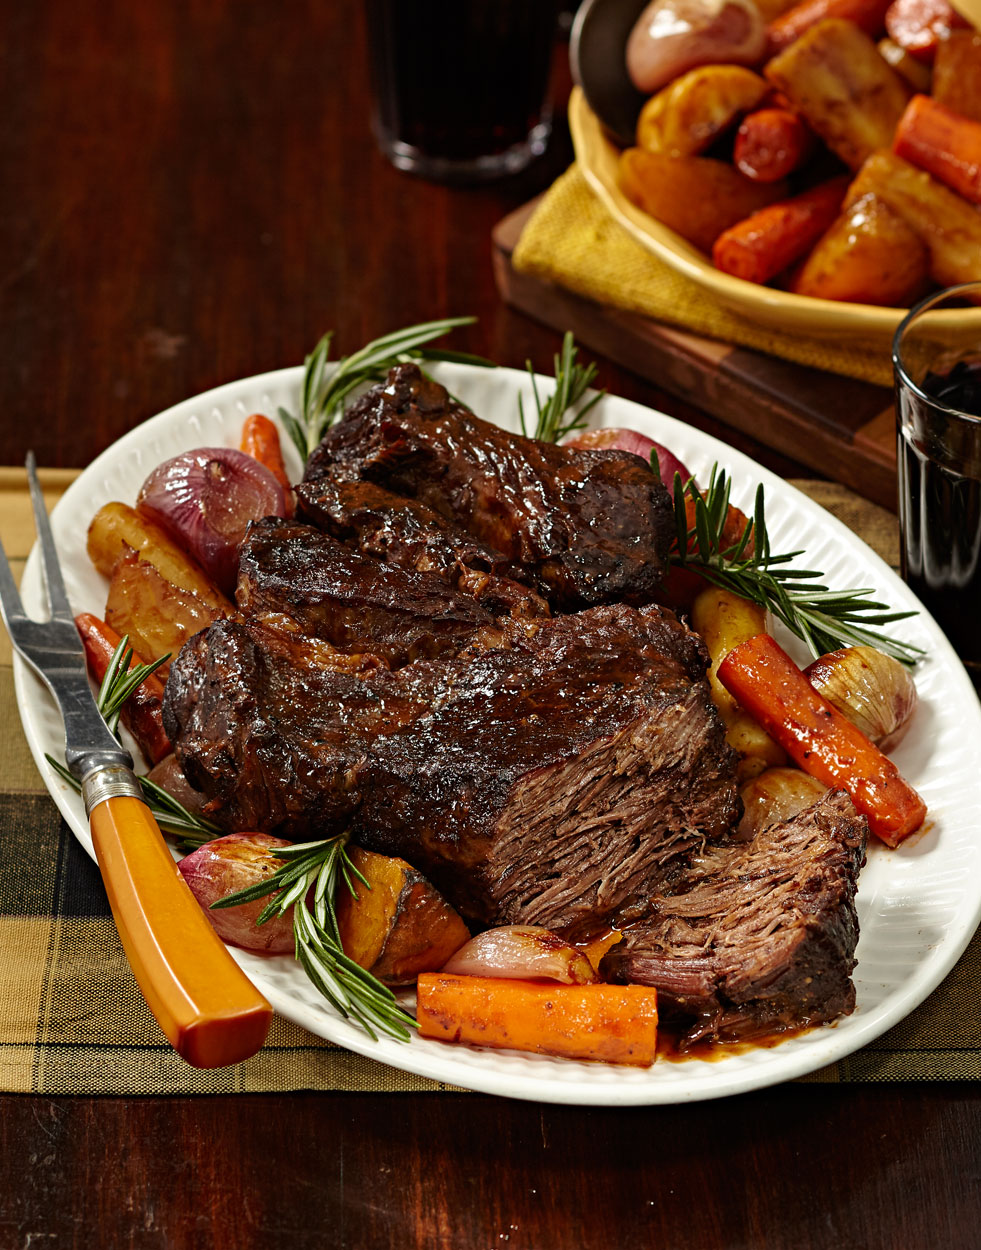 Pot Roast with Root Vegetables